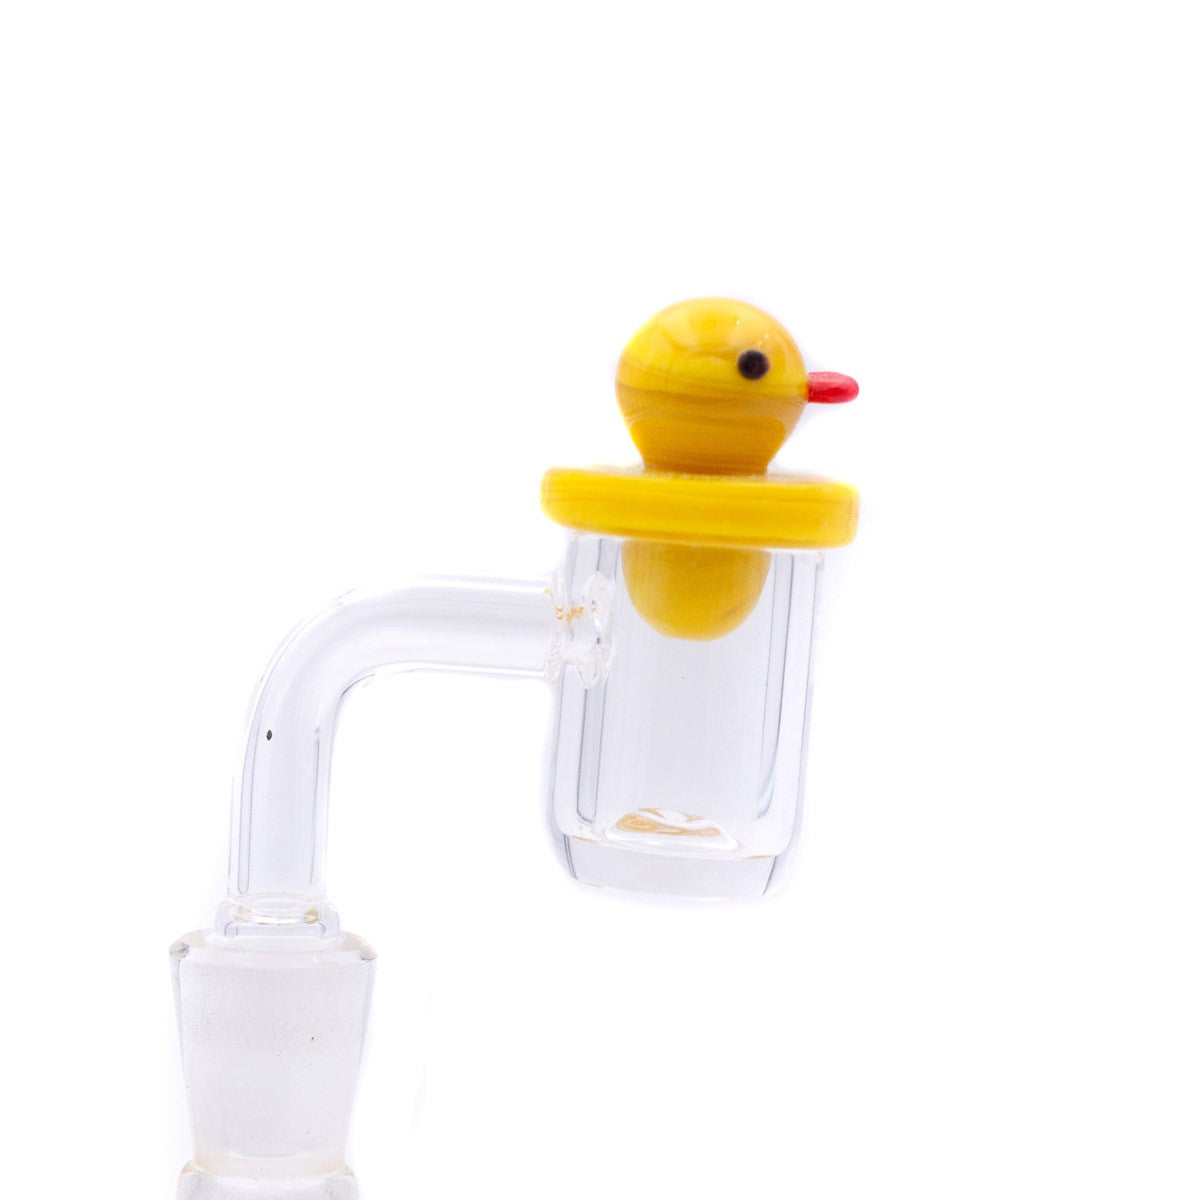 Rubber Duckie UFO Carb Cap from The Stash Shack, side view on white background